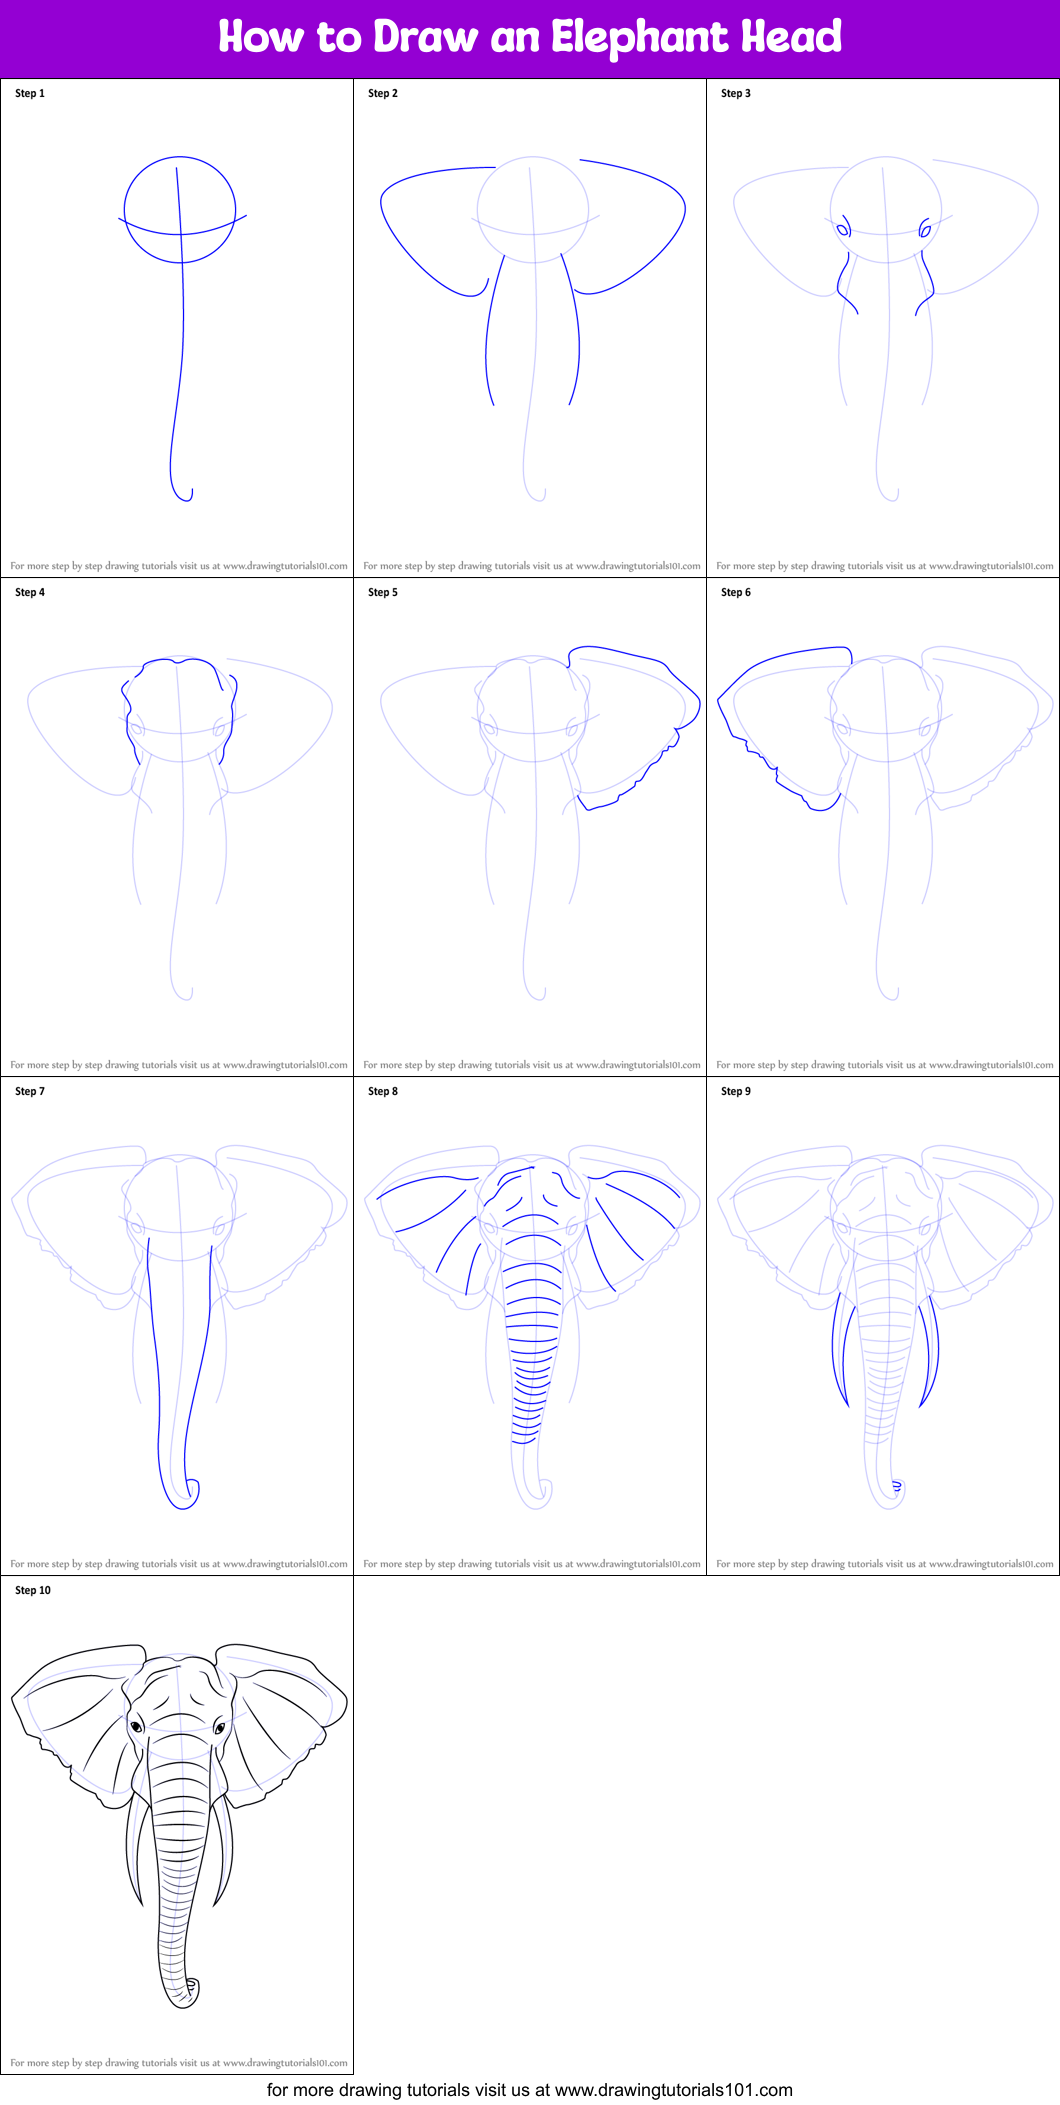 How to Draw an Elephant Head printable step by step